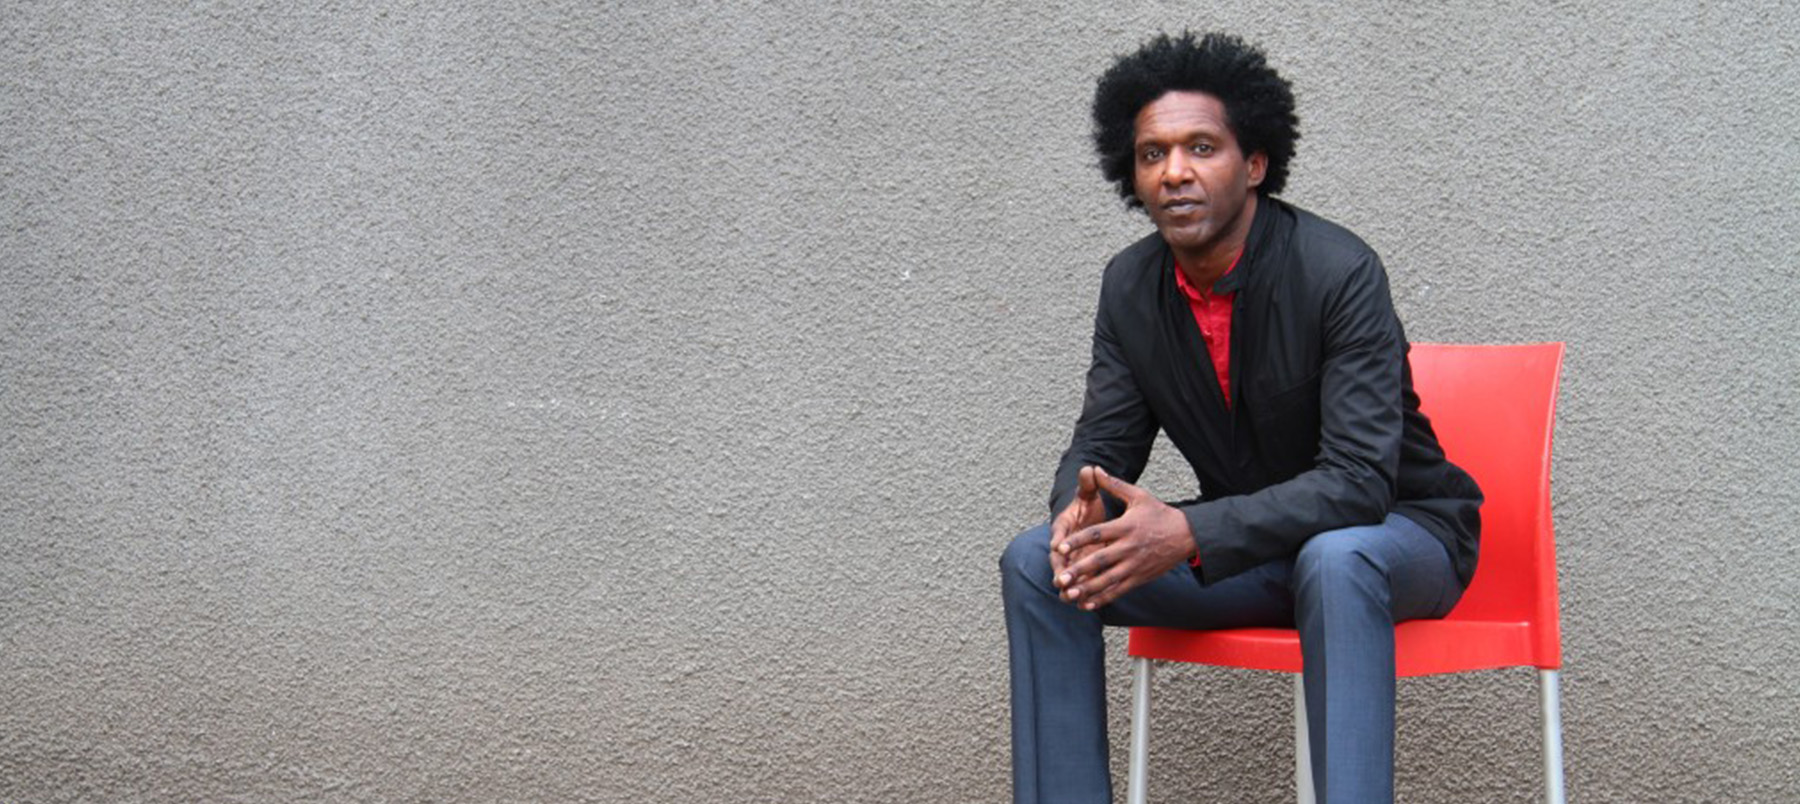 Lemn Sissay sitting on red chair